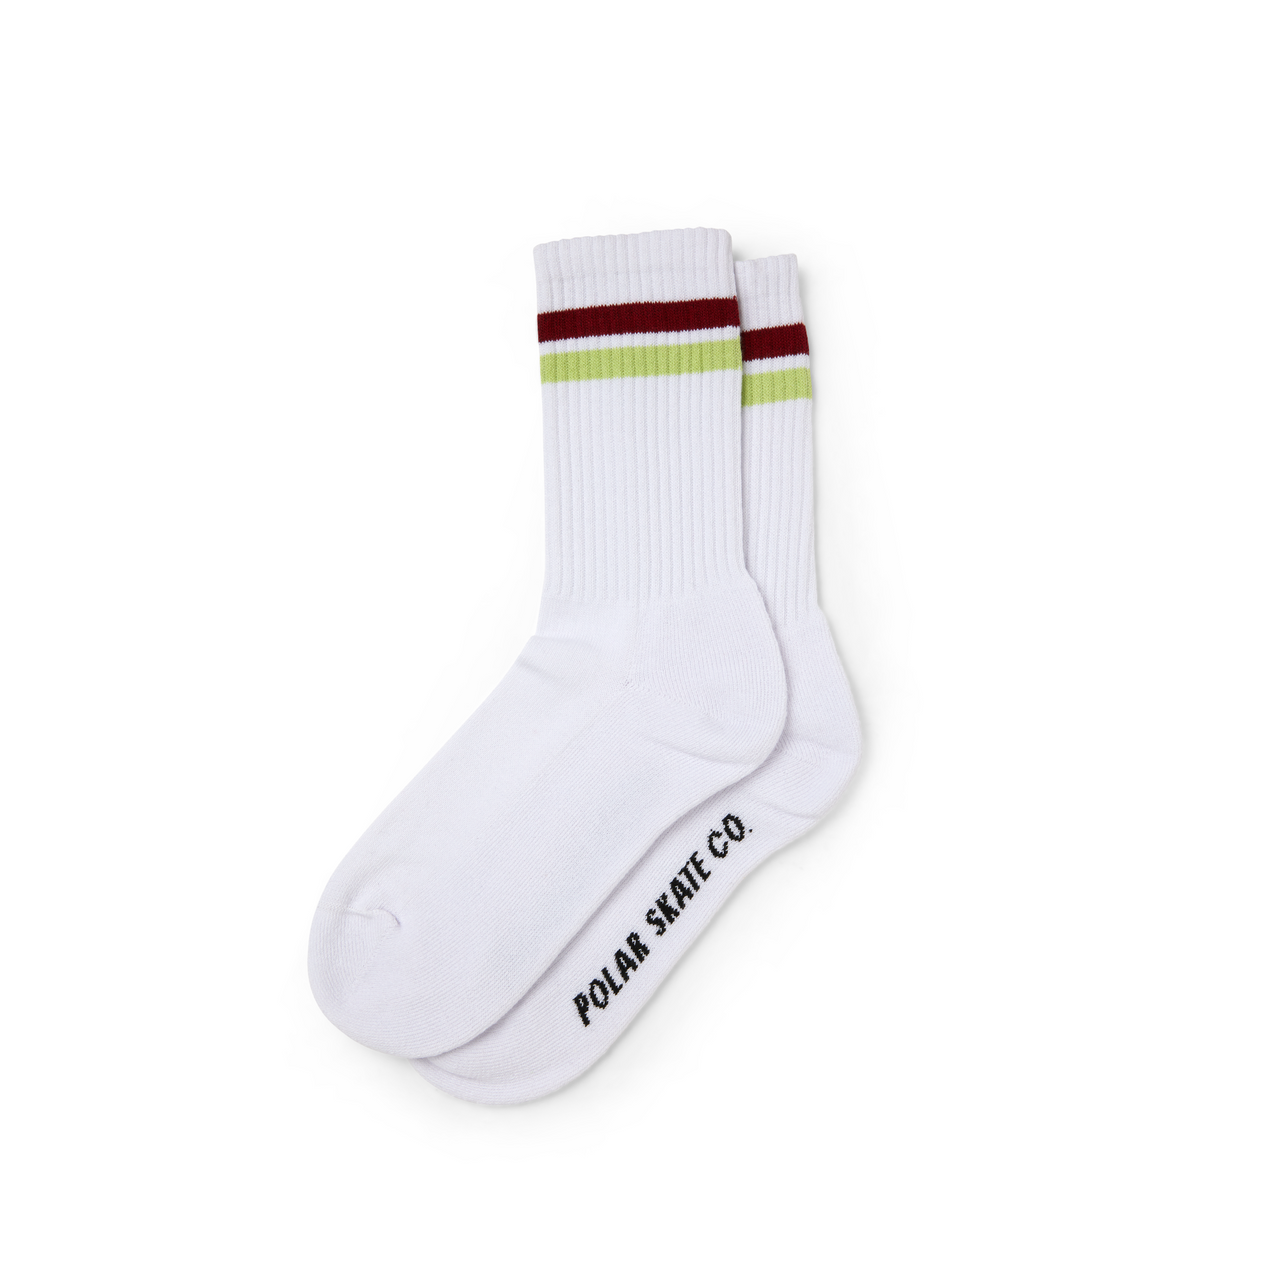 Stripe Socks - White/ Rich Red / Chartreuse